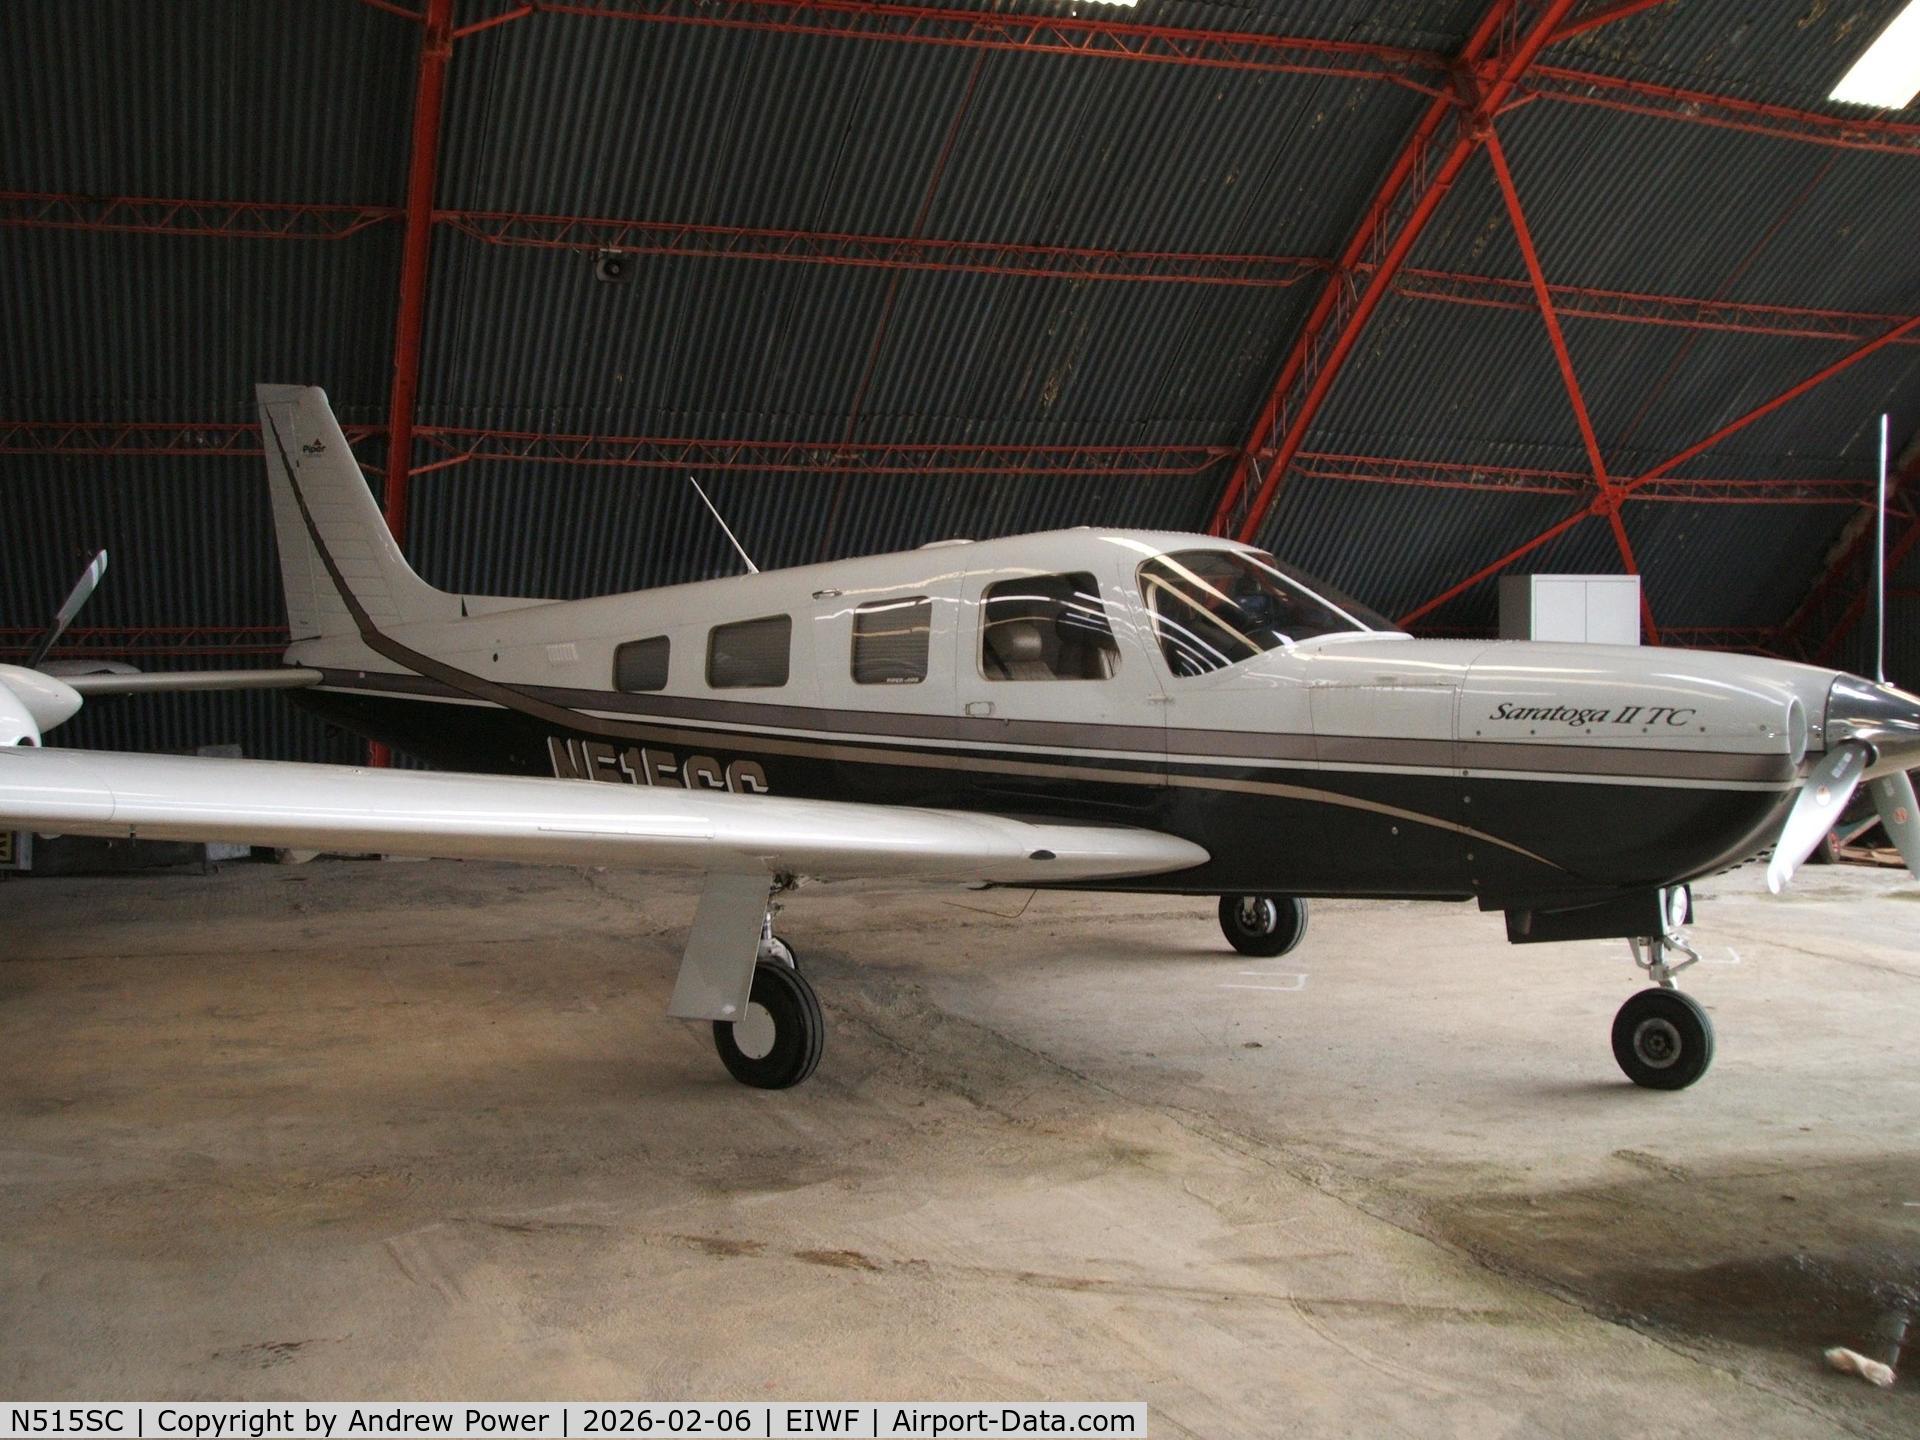 N515SC, 2003 Piper PA-32R-301T Turbo Saratoga C/N 3257315, Parked In Waterford Ireland